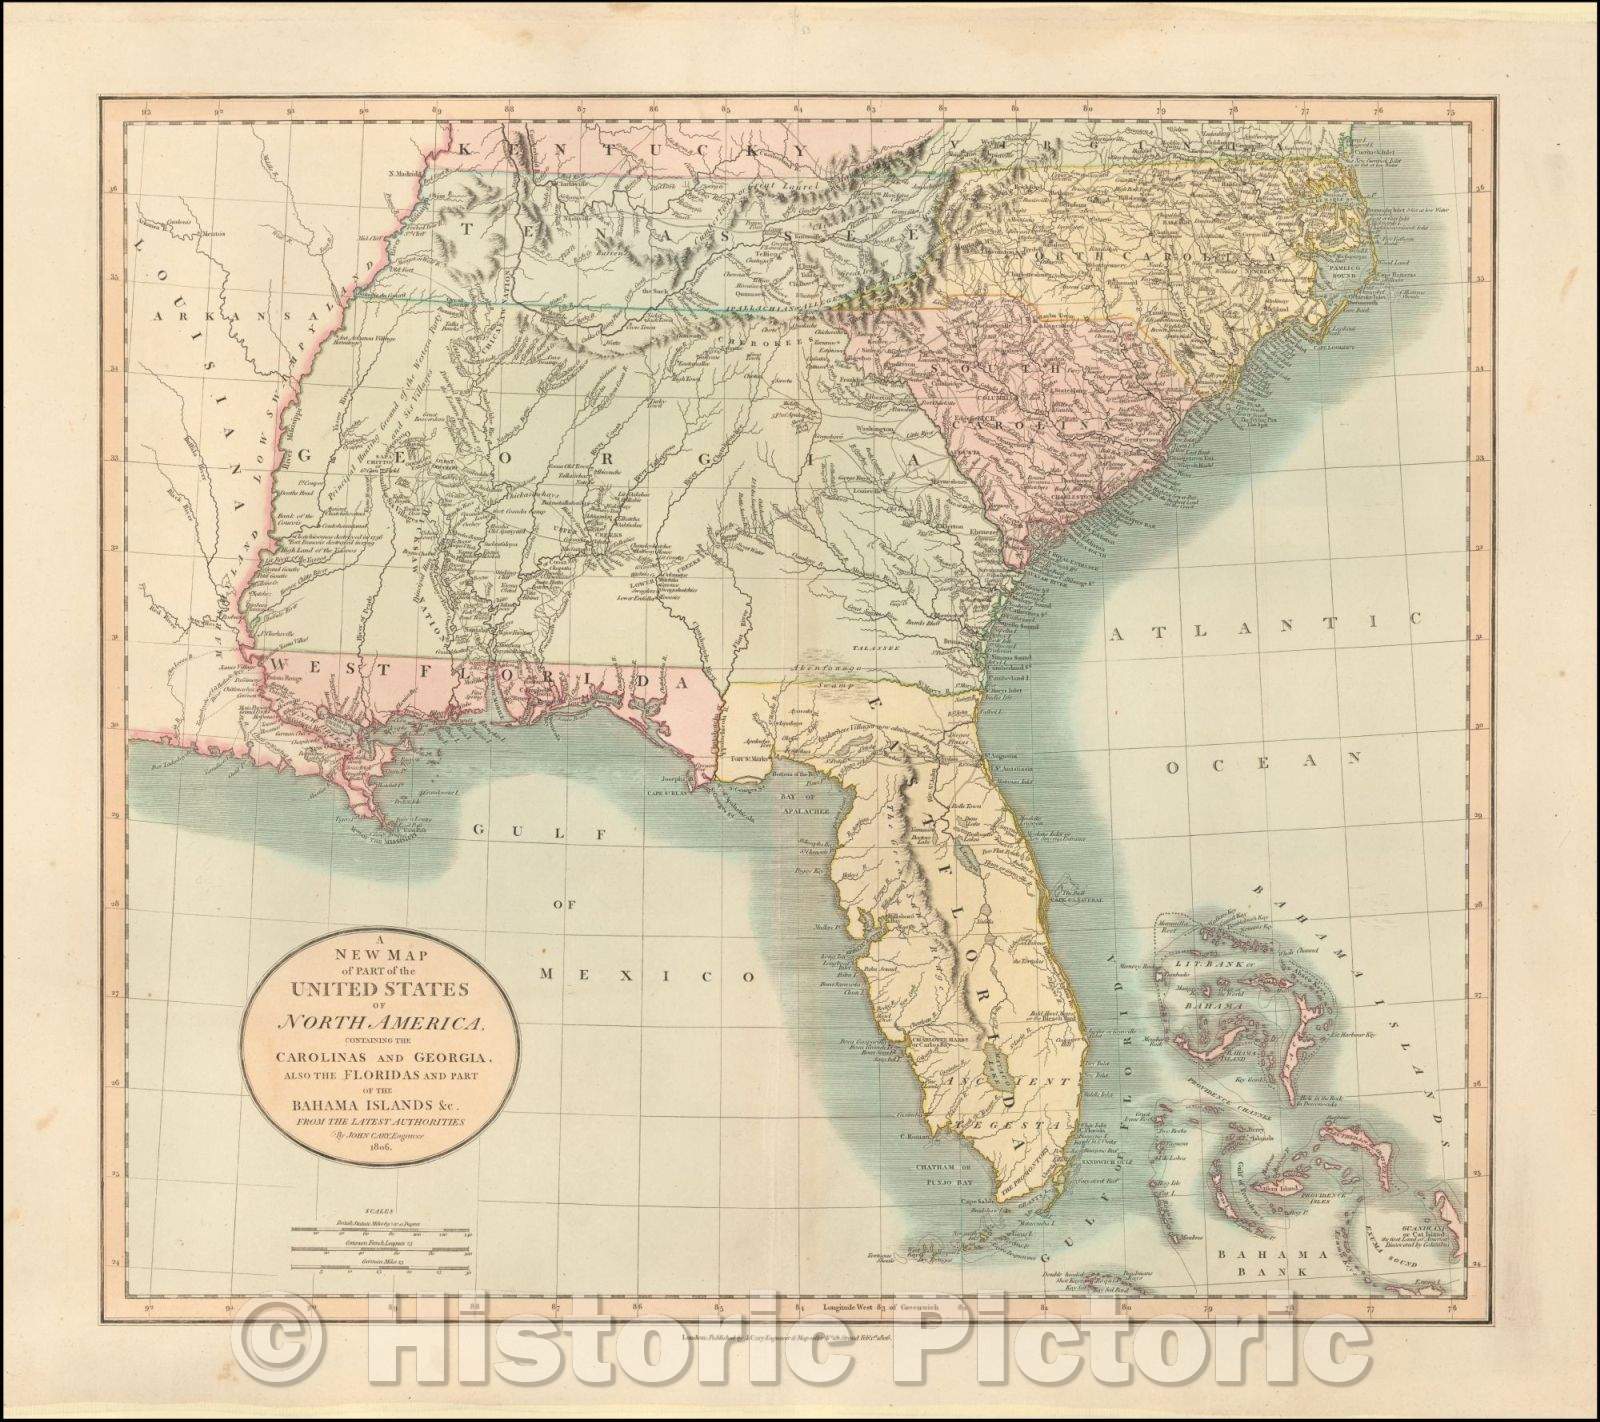 Historic Map - A New of Part of the United States of North America Containing The Carolinas And Georgia. Also The Floridas And Part Of The Bahama Islands, 1806 v3